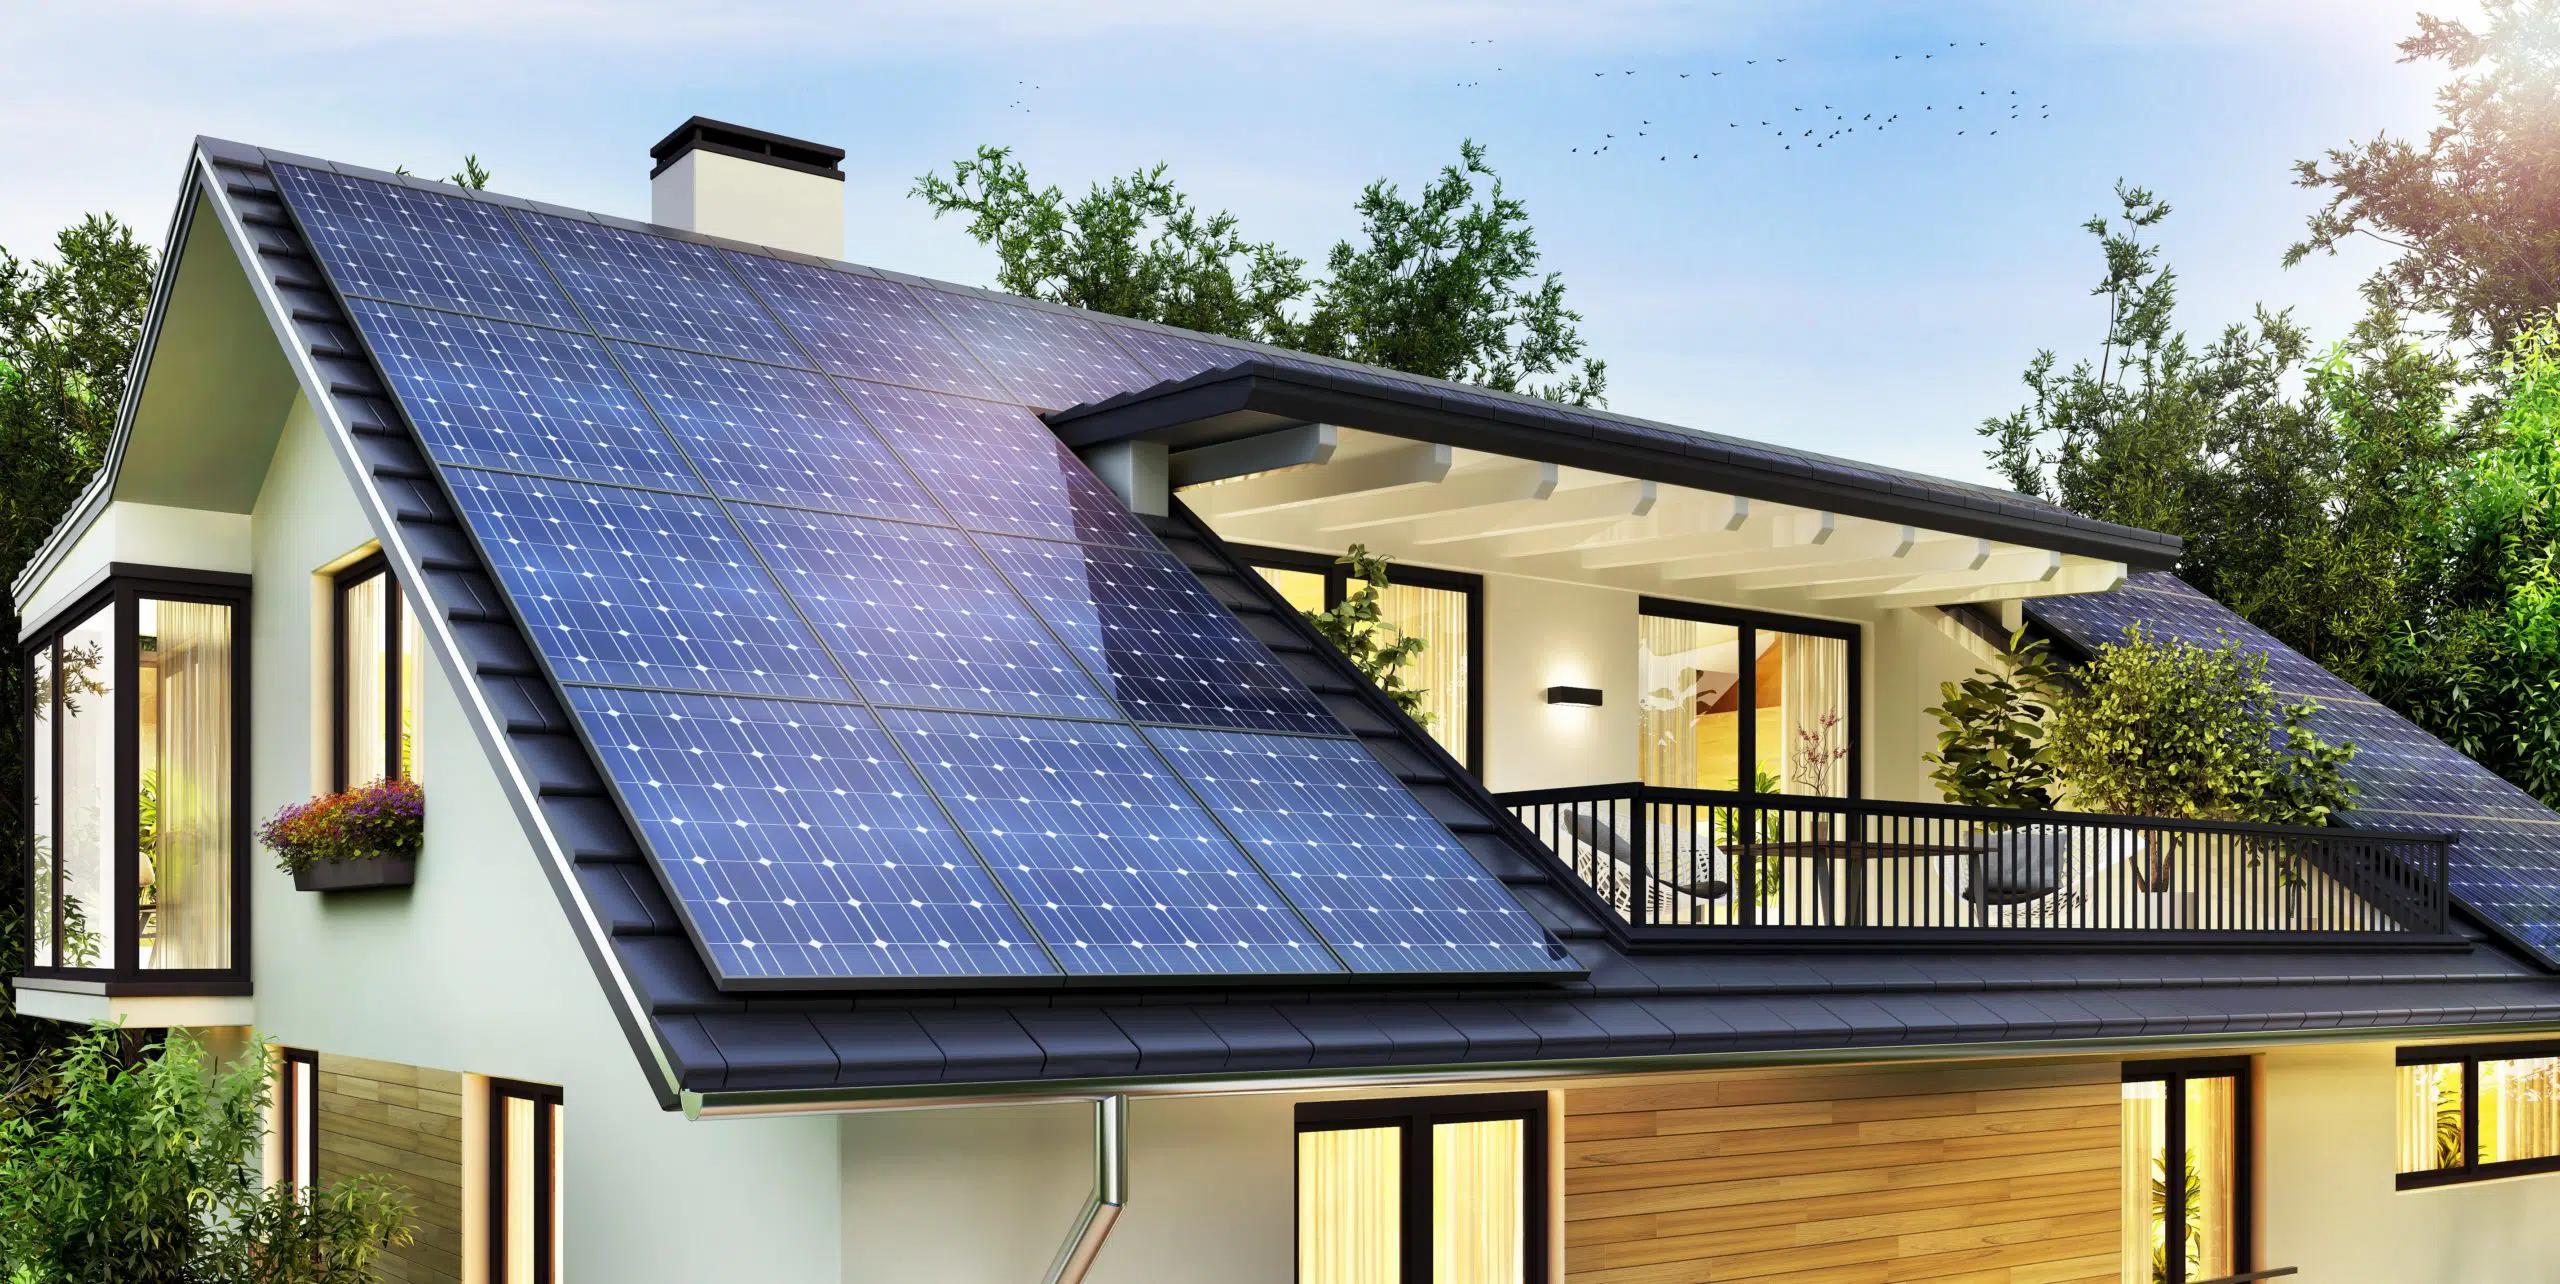 smart meters and solar panels - Are there any disadvantages to smart meters